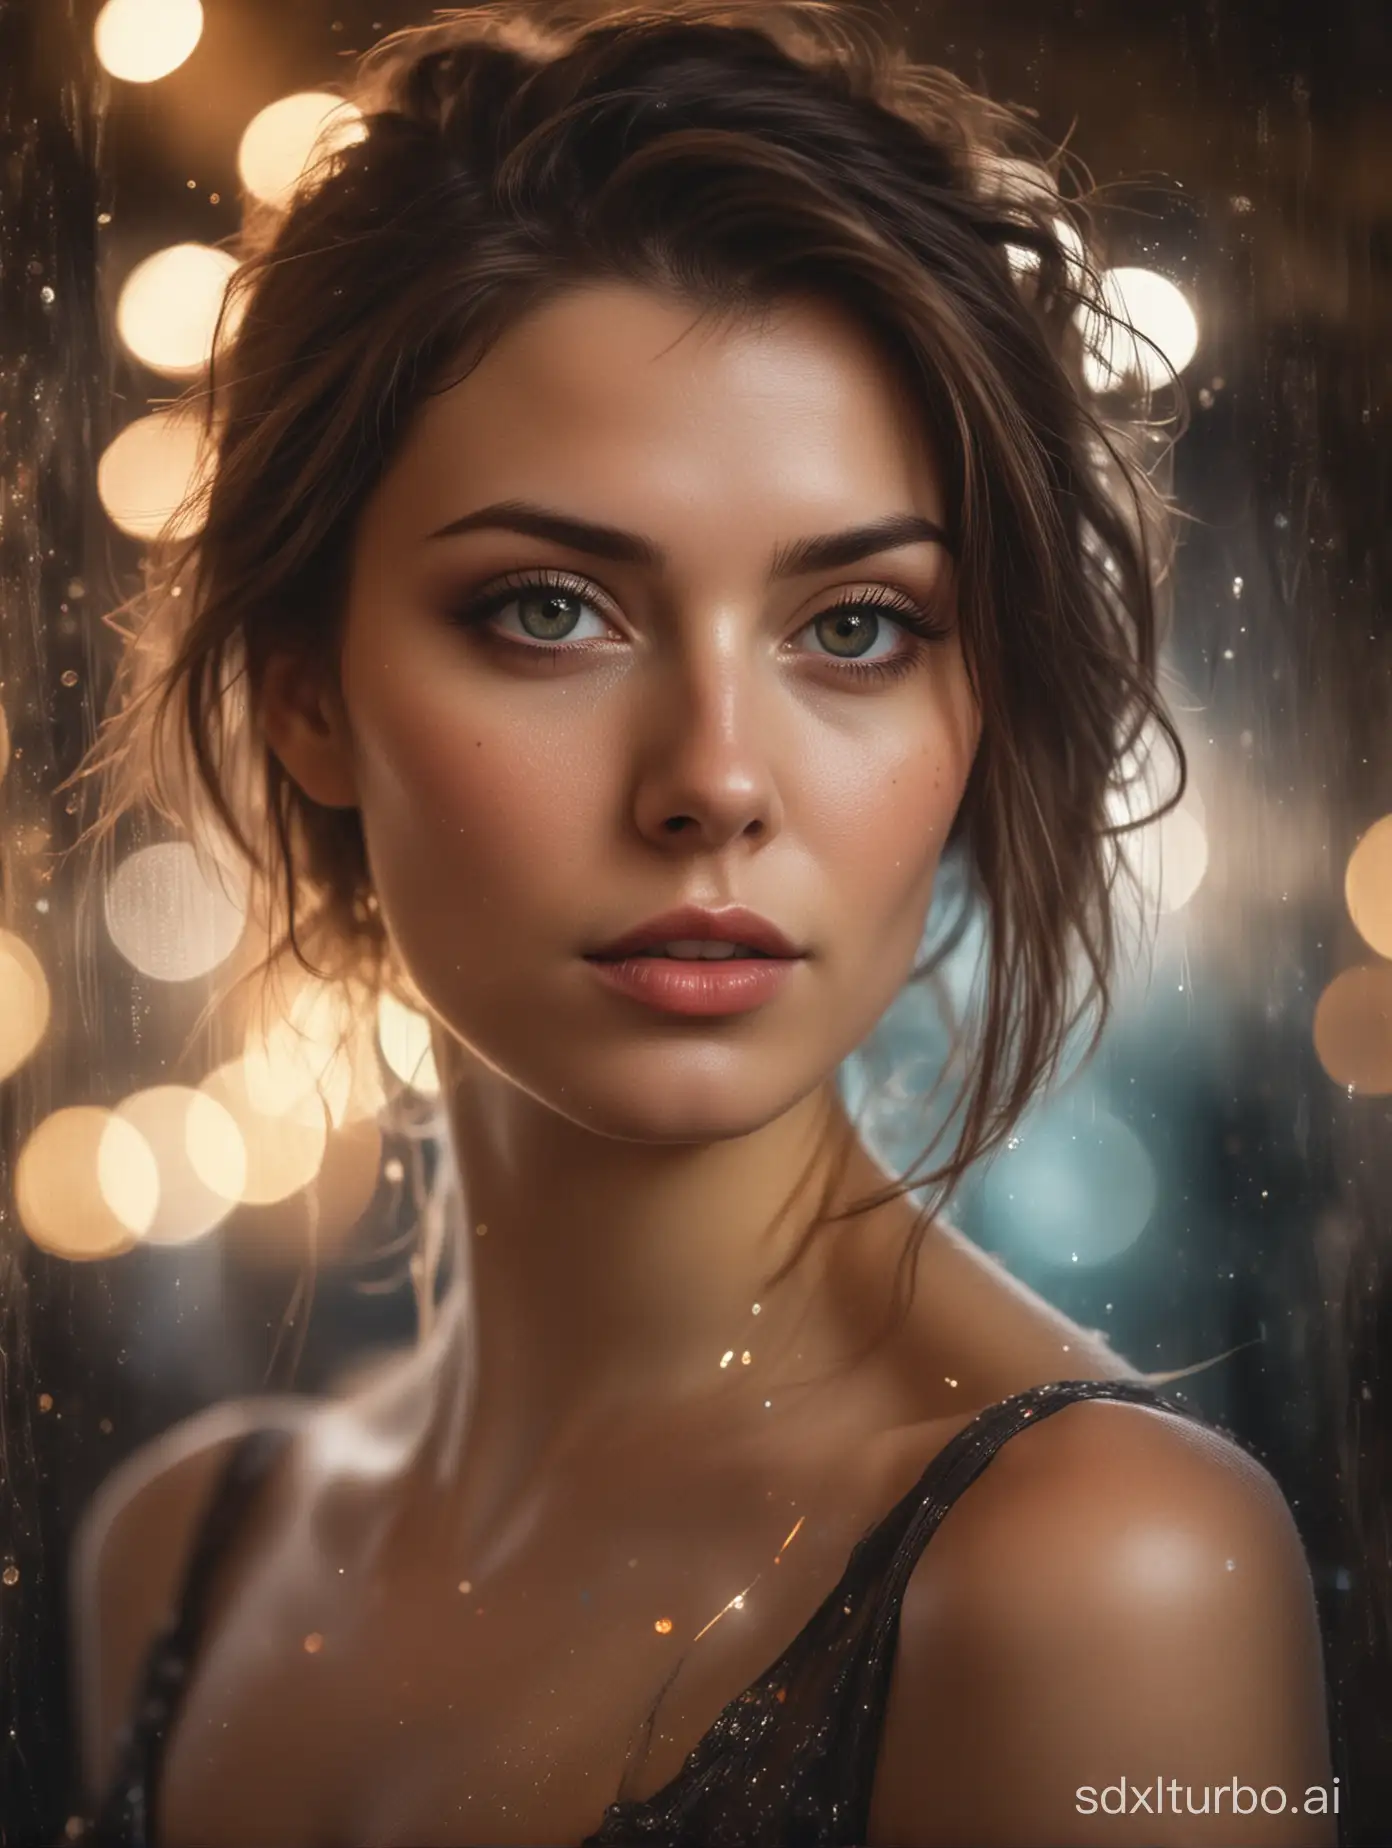 Dual exposure photo of a Bokeh Overlay and a blend of Bordluxe and Dames aesthetics, the woman's alluring gaze drawing you in, inviting you to explore the mystery that she is. The depth of field is shallow, keeping her in sharp focus while the bustling background blurs into an abstract painting of lights and shadows.